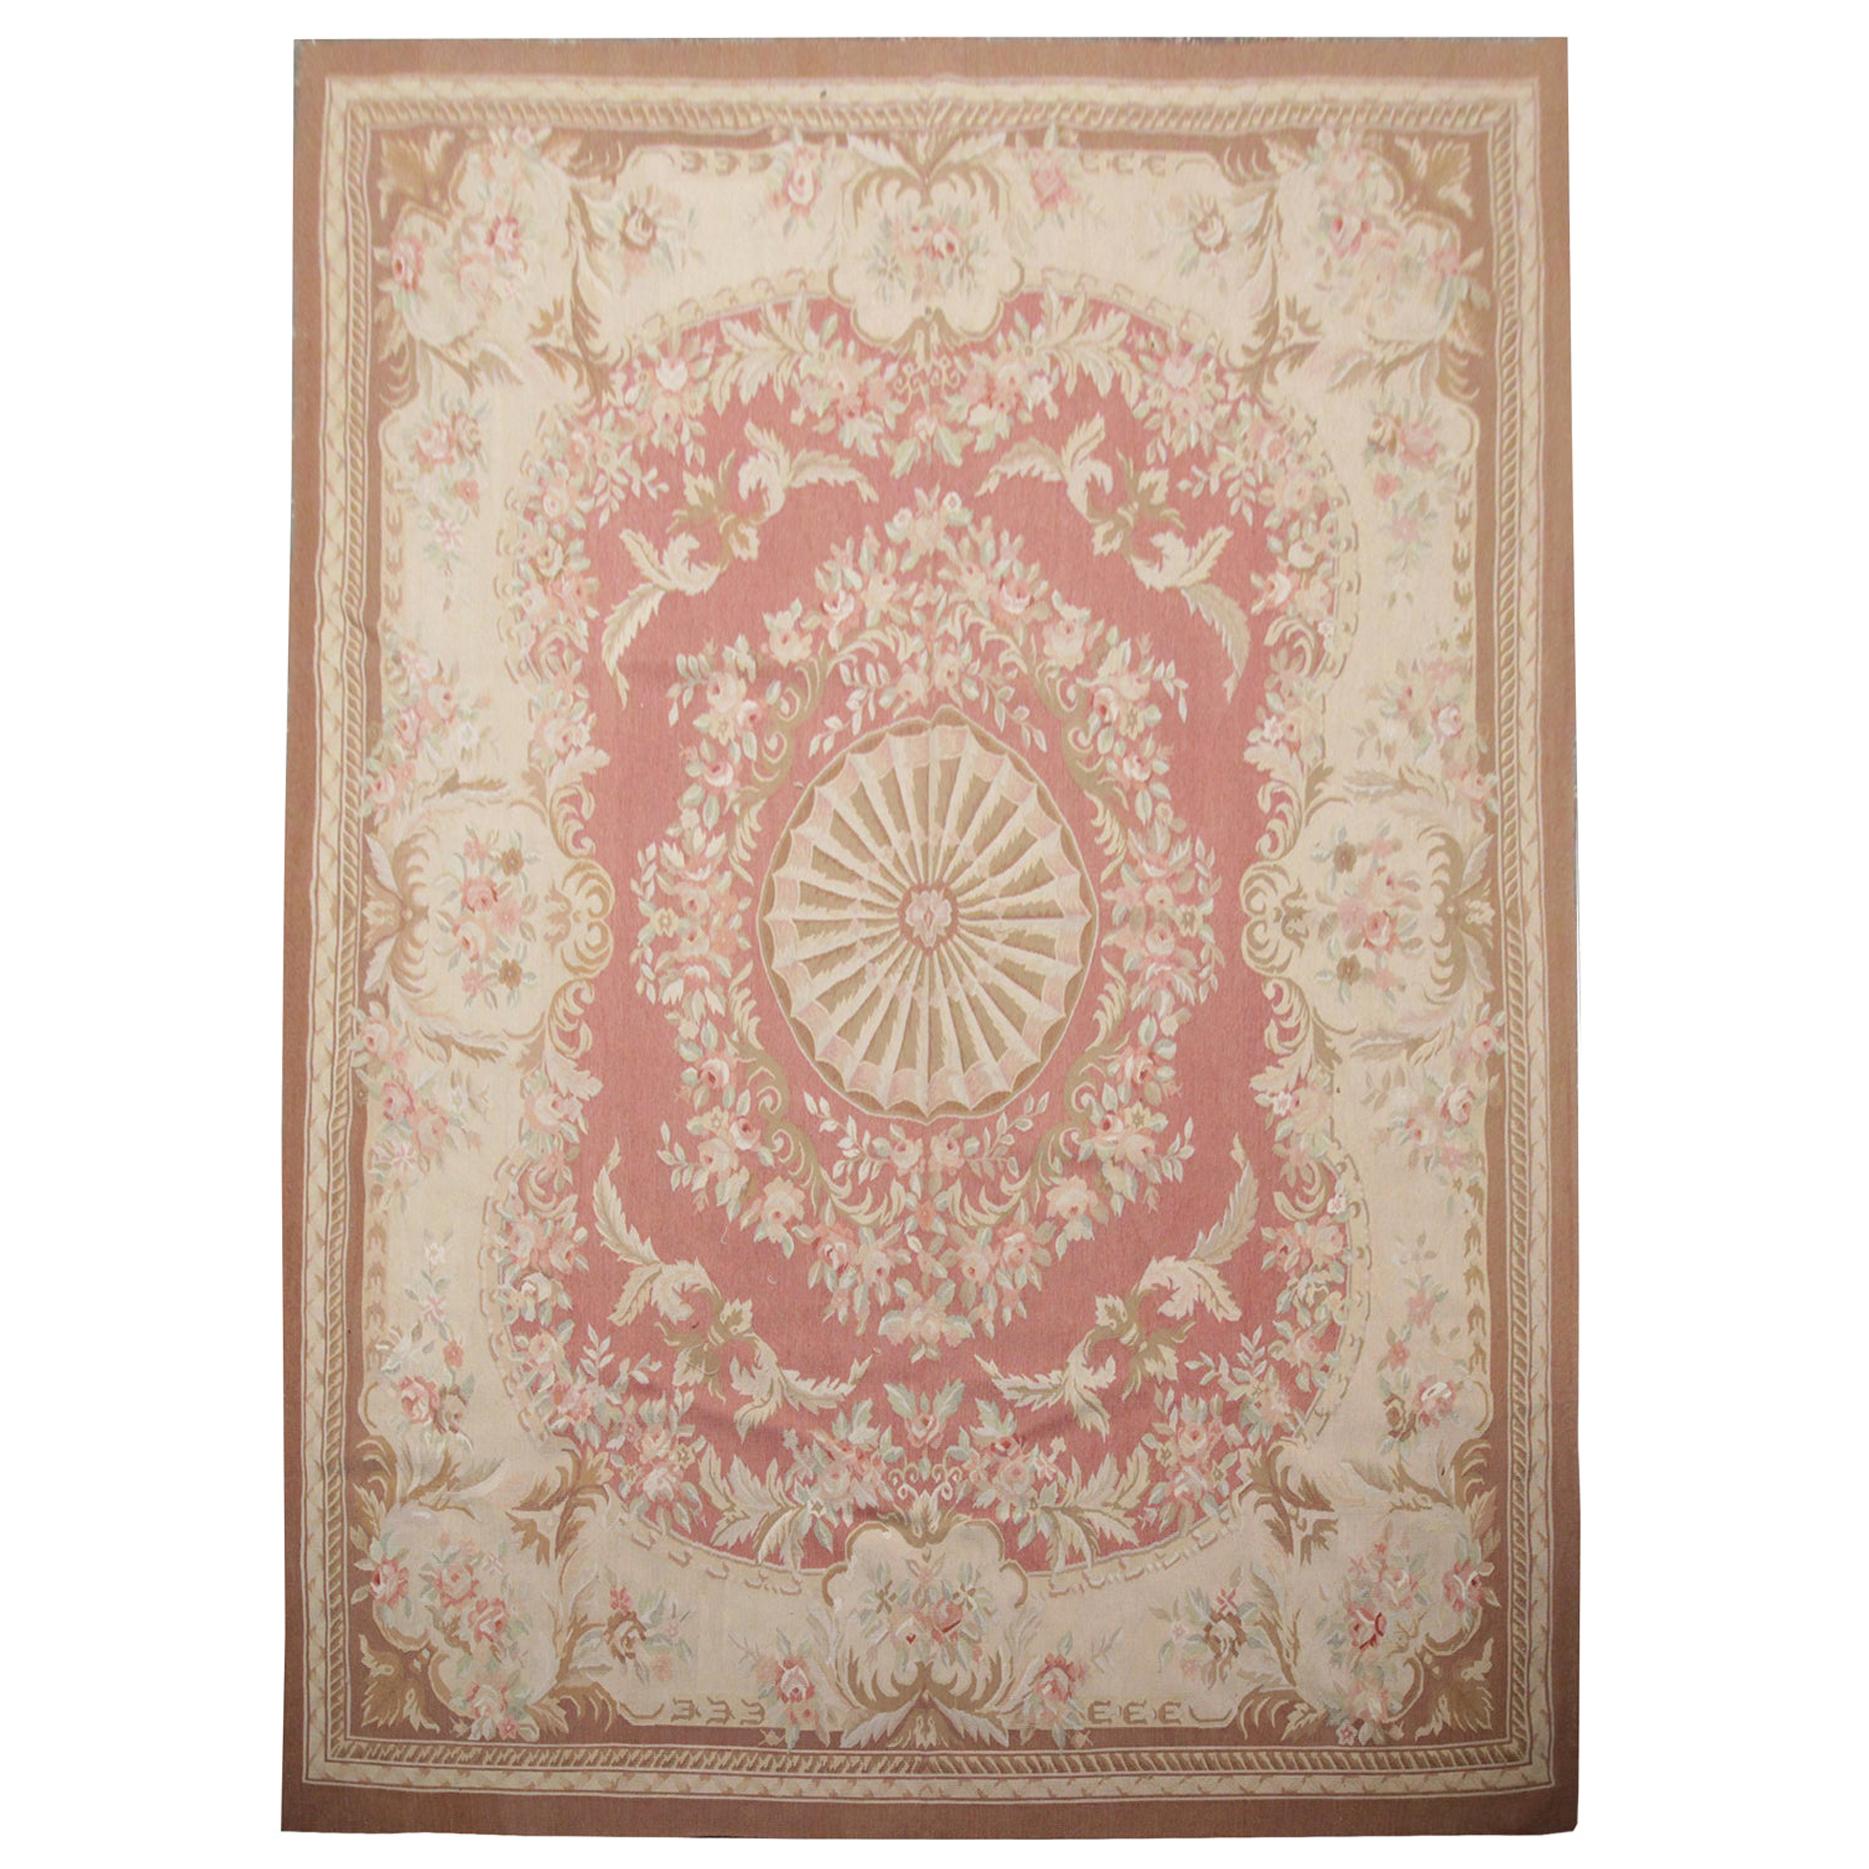 Handmade Carpet Vintage Aubusson Style Rug 1980 French- Pink and Beige Wool Rugs For Sale